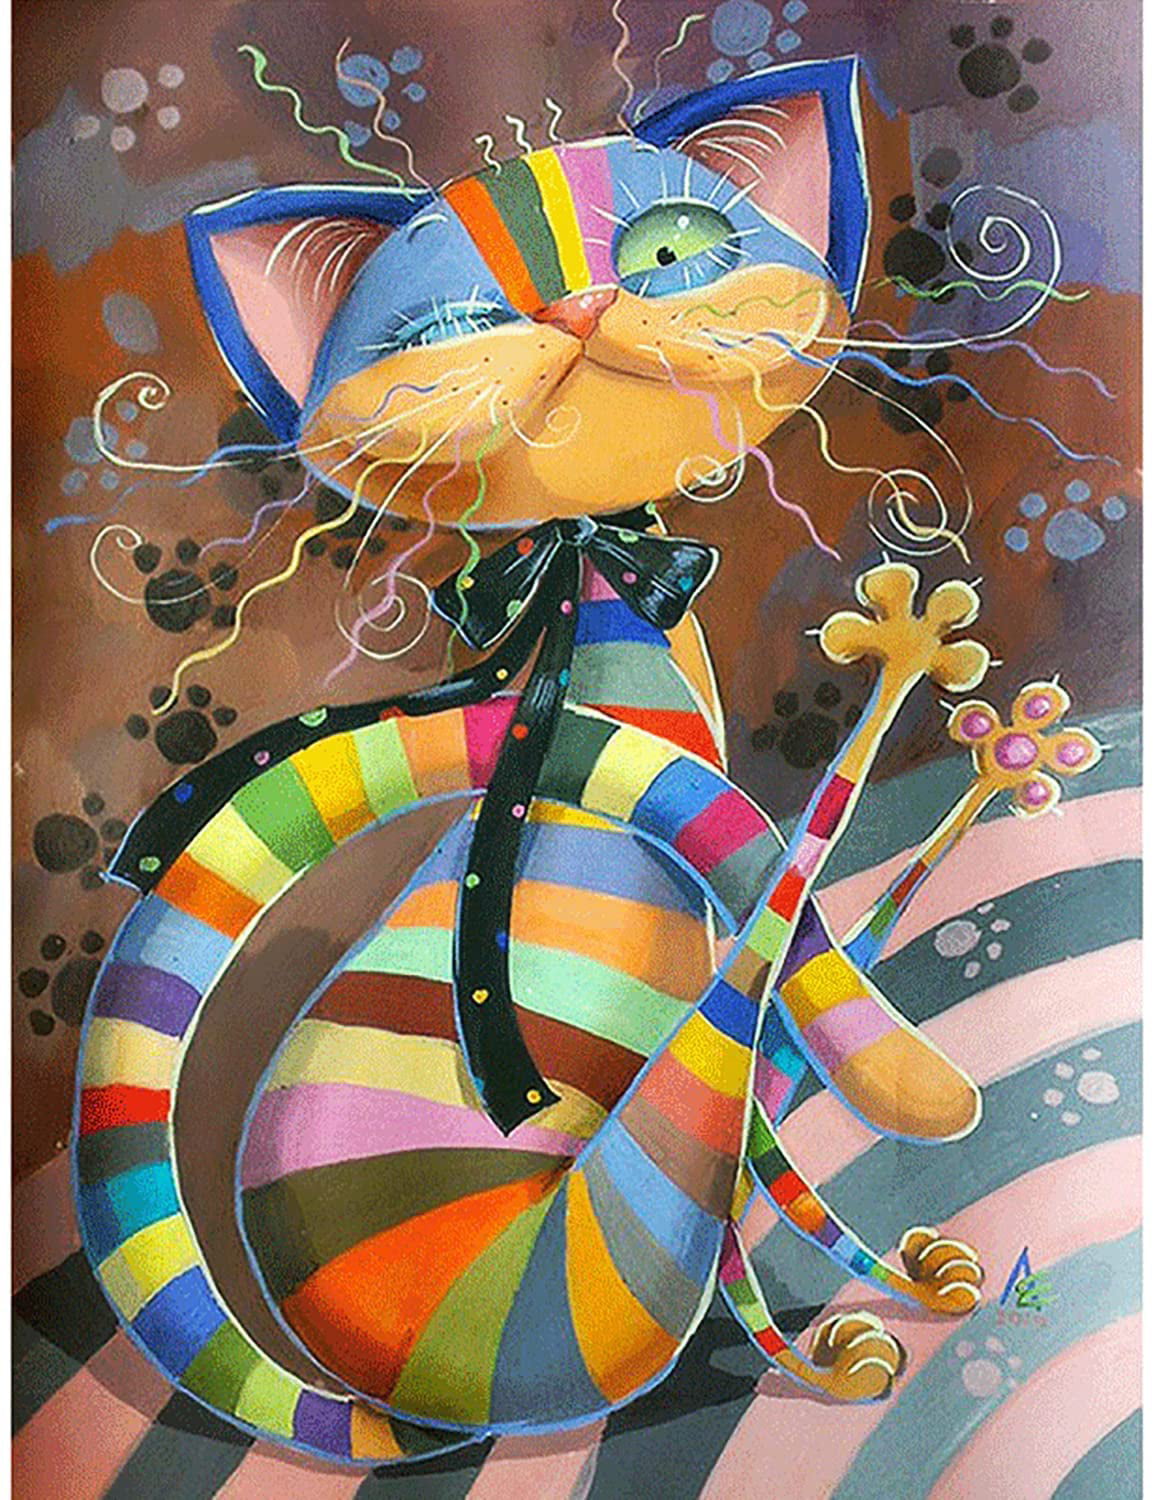 5D Diamond Painting Art Cat Kits for Home Wall Decor 12x16inch Cat Diamond Painting Kits for Adults and Kids Diamond Painting Cat Diamond Art Kits 